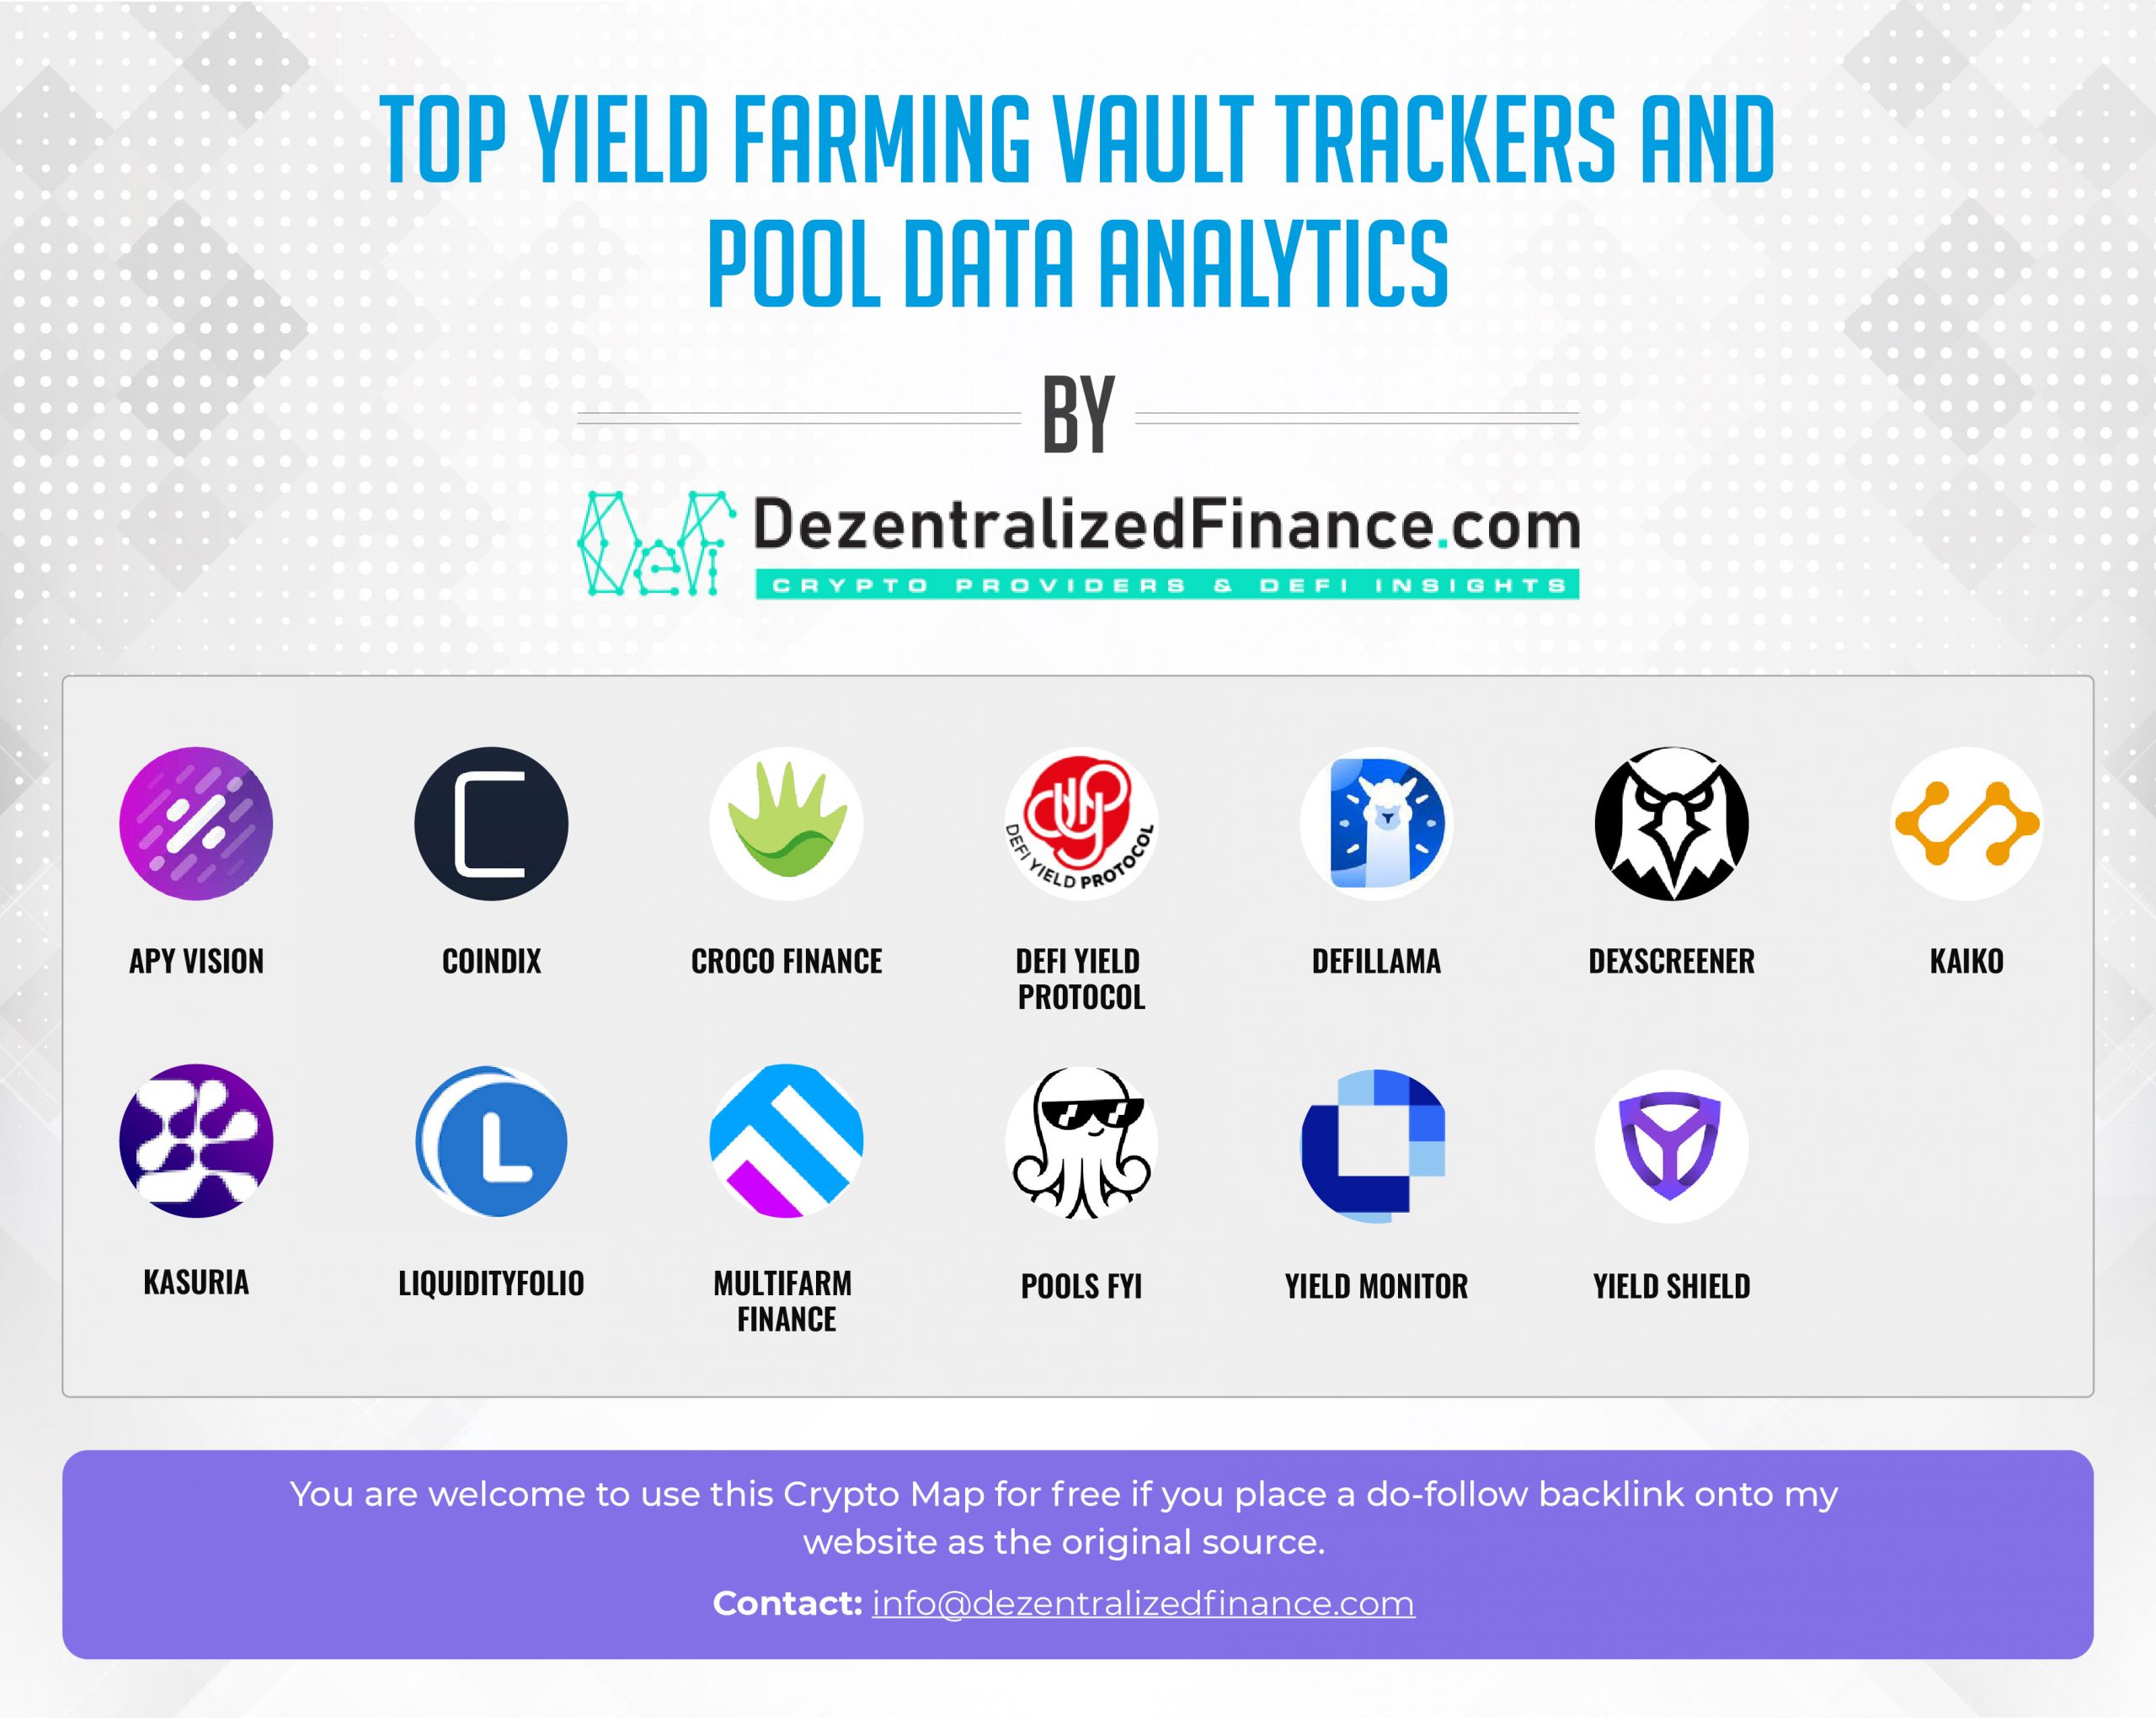 Top-Yield-Farming-Vault-Trackers-and-Pool-Data-Analytics